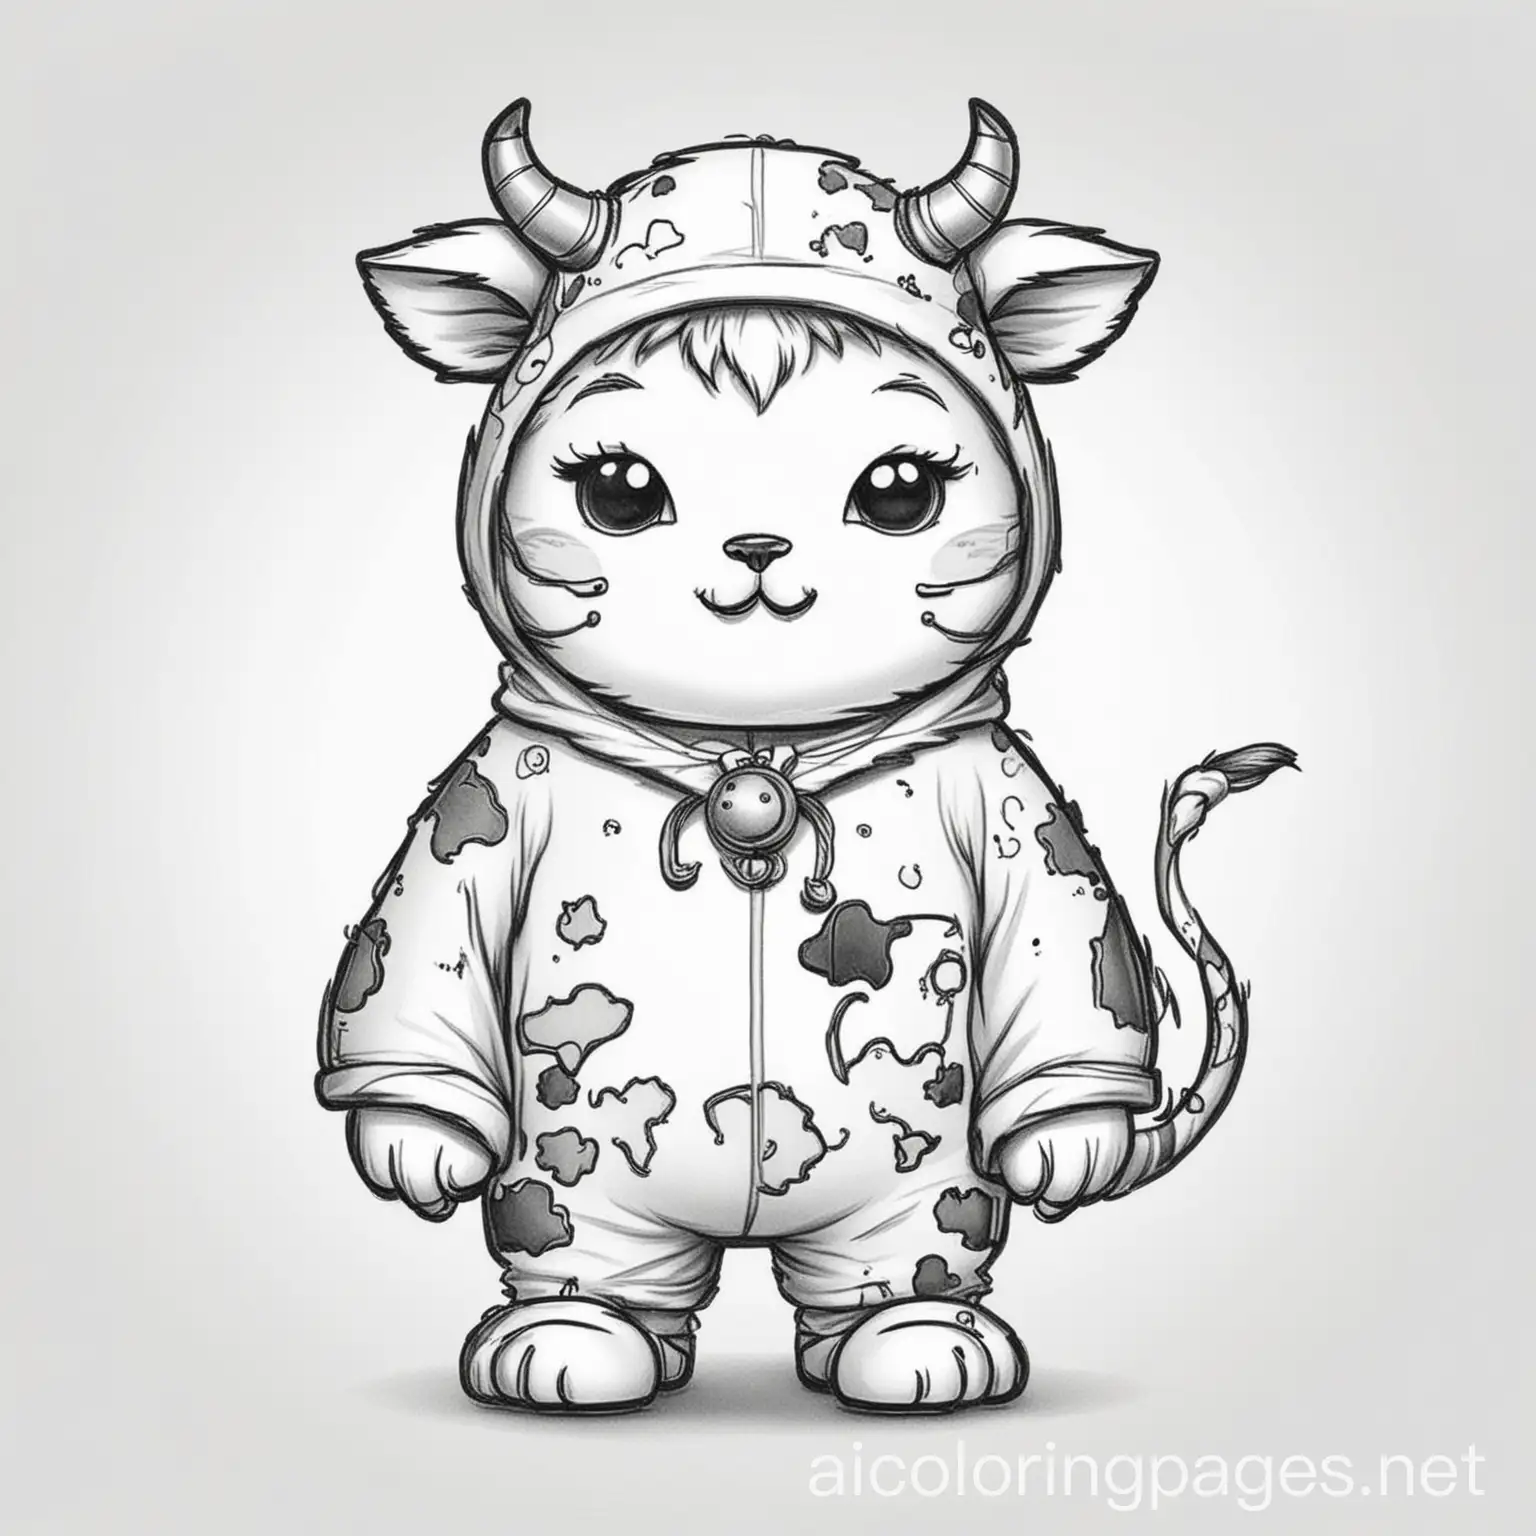 A cat wearing a cow Halloween costume, Coloring Page, black and white, line art, white background, Simplicity, Ample White Space. The background of the coloring page is plain white to make it easy for young children to color within the lines. The outlines of all the subjects are easy to distinguish, making it simple for kids to color without too much difficulty